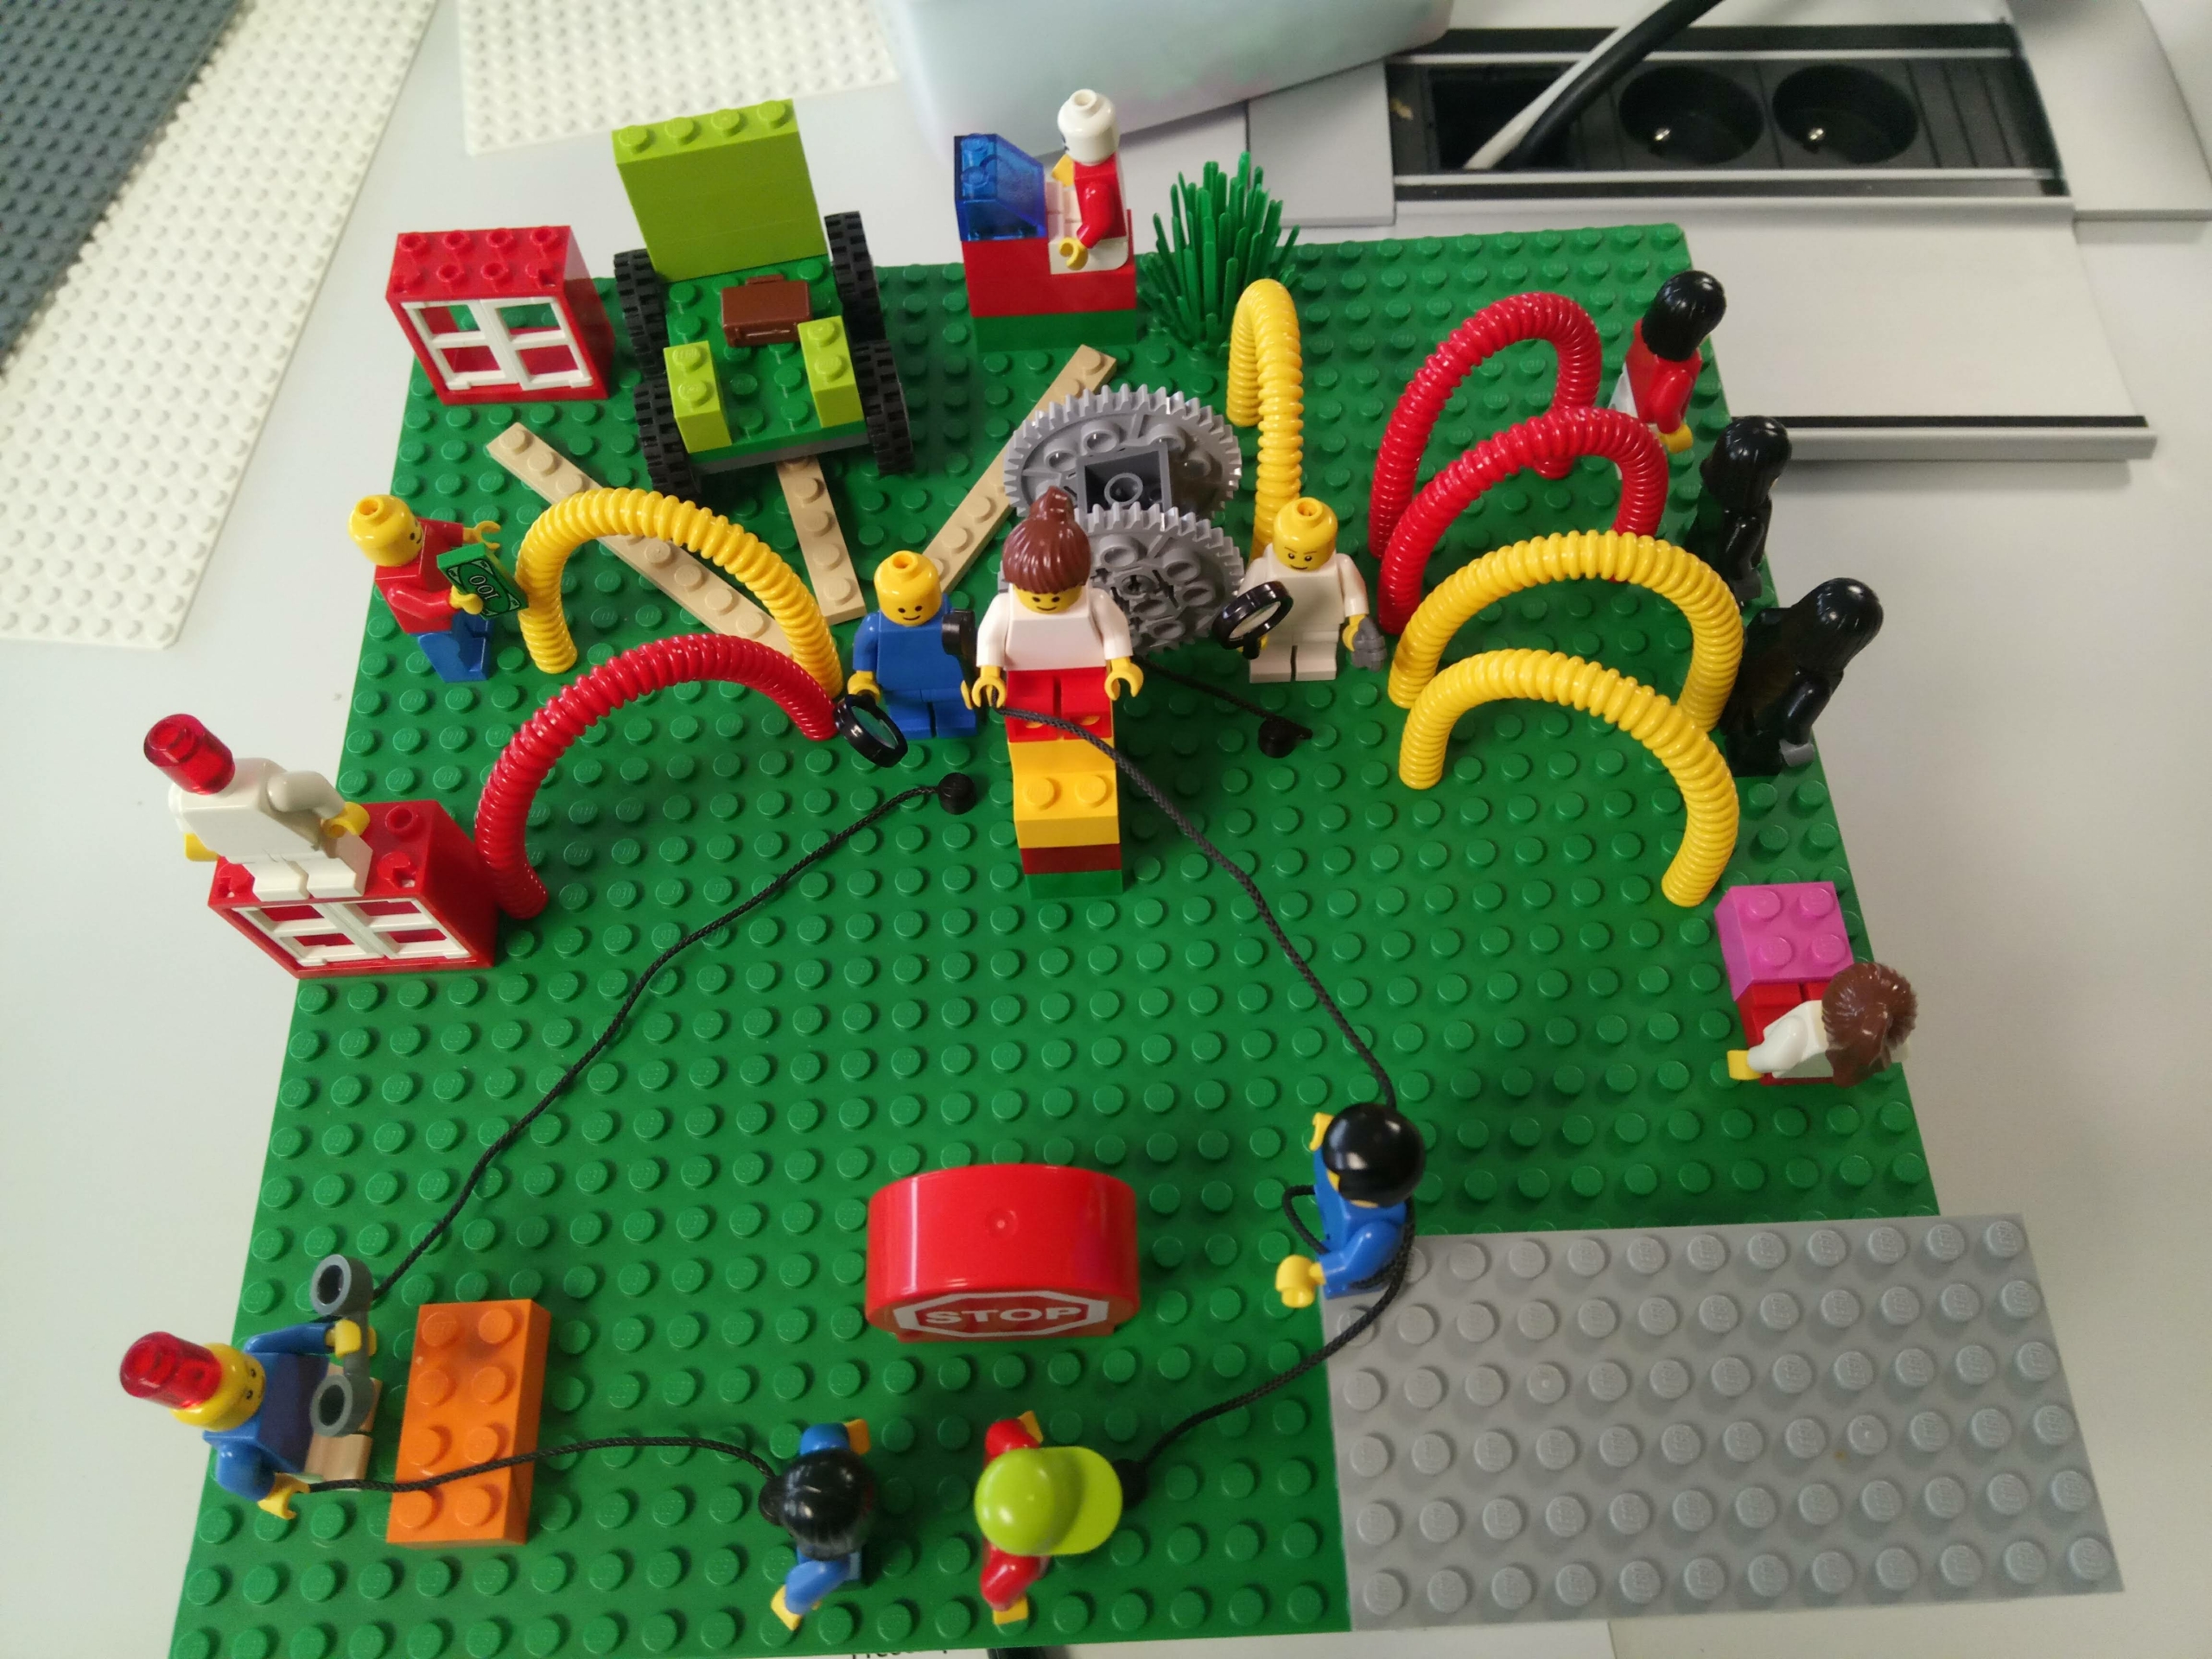 Atelier marketing serious lego by Glad events